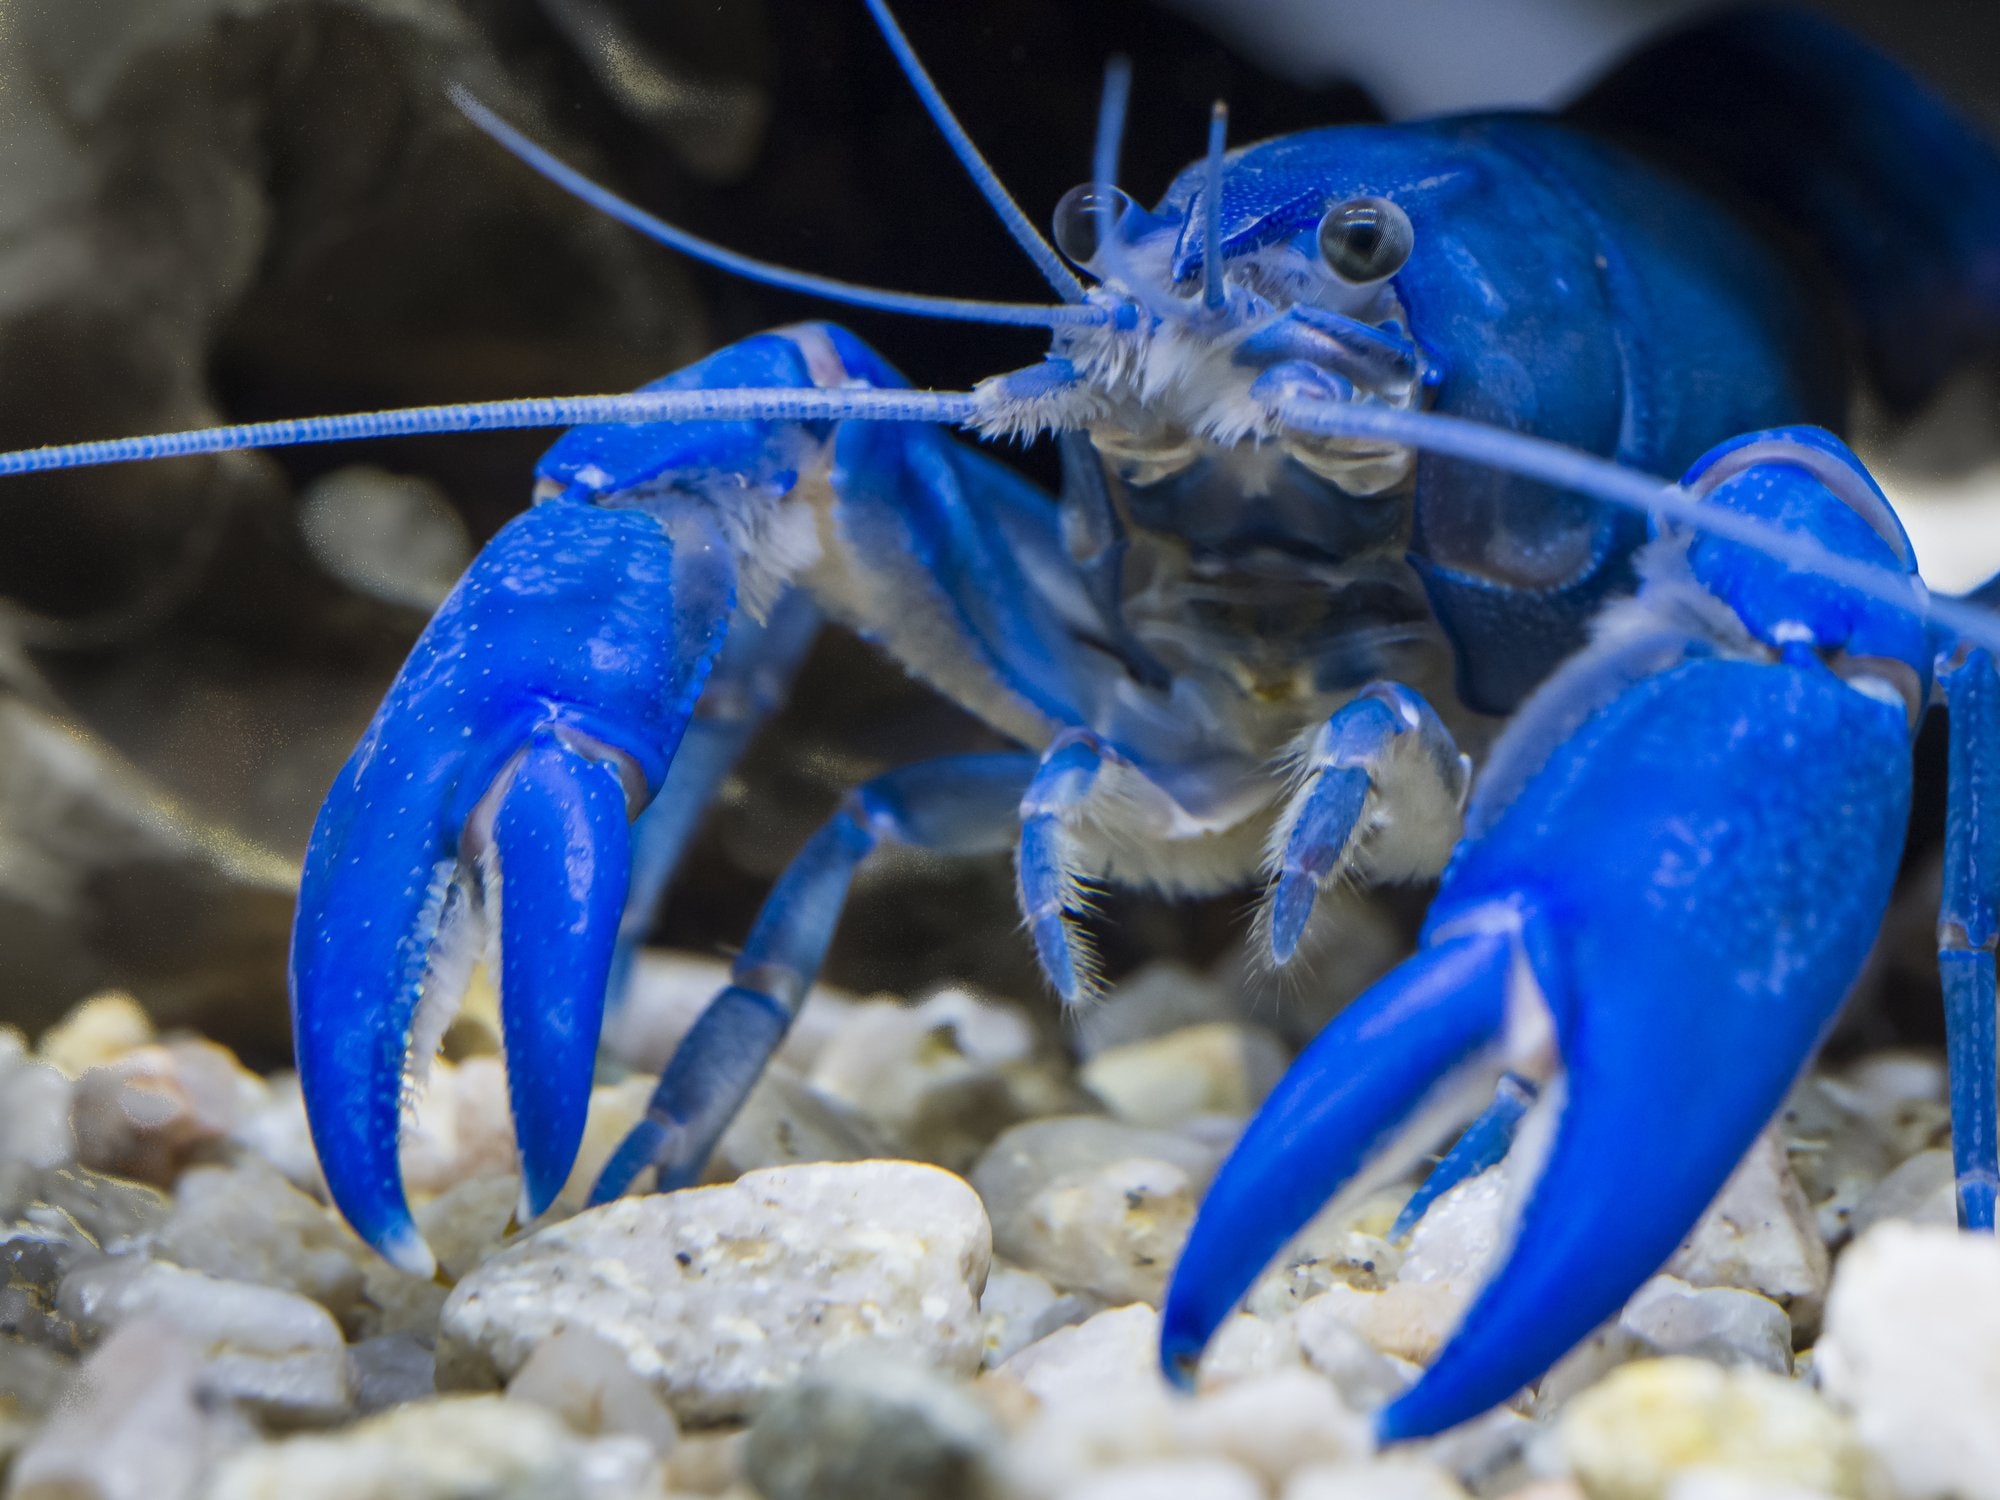 Exploring the Delicacies of Marron: Cultivating and Savoring Australia's Blue Crayfish